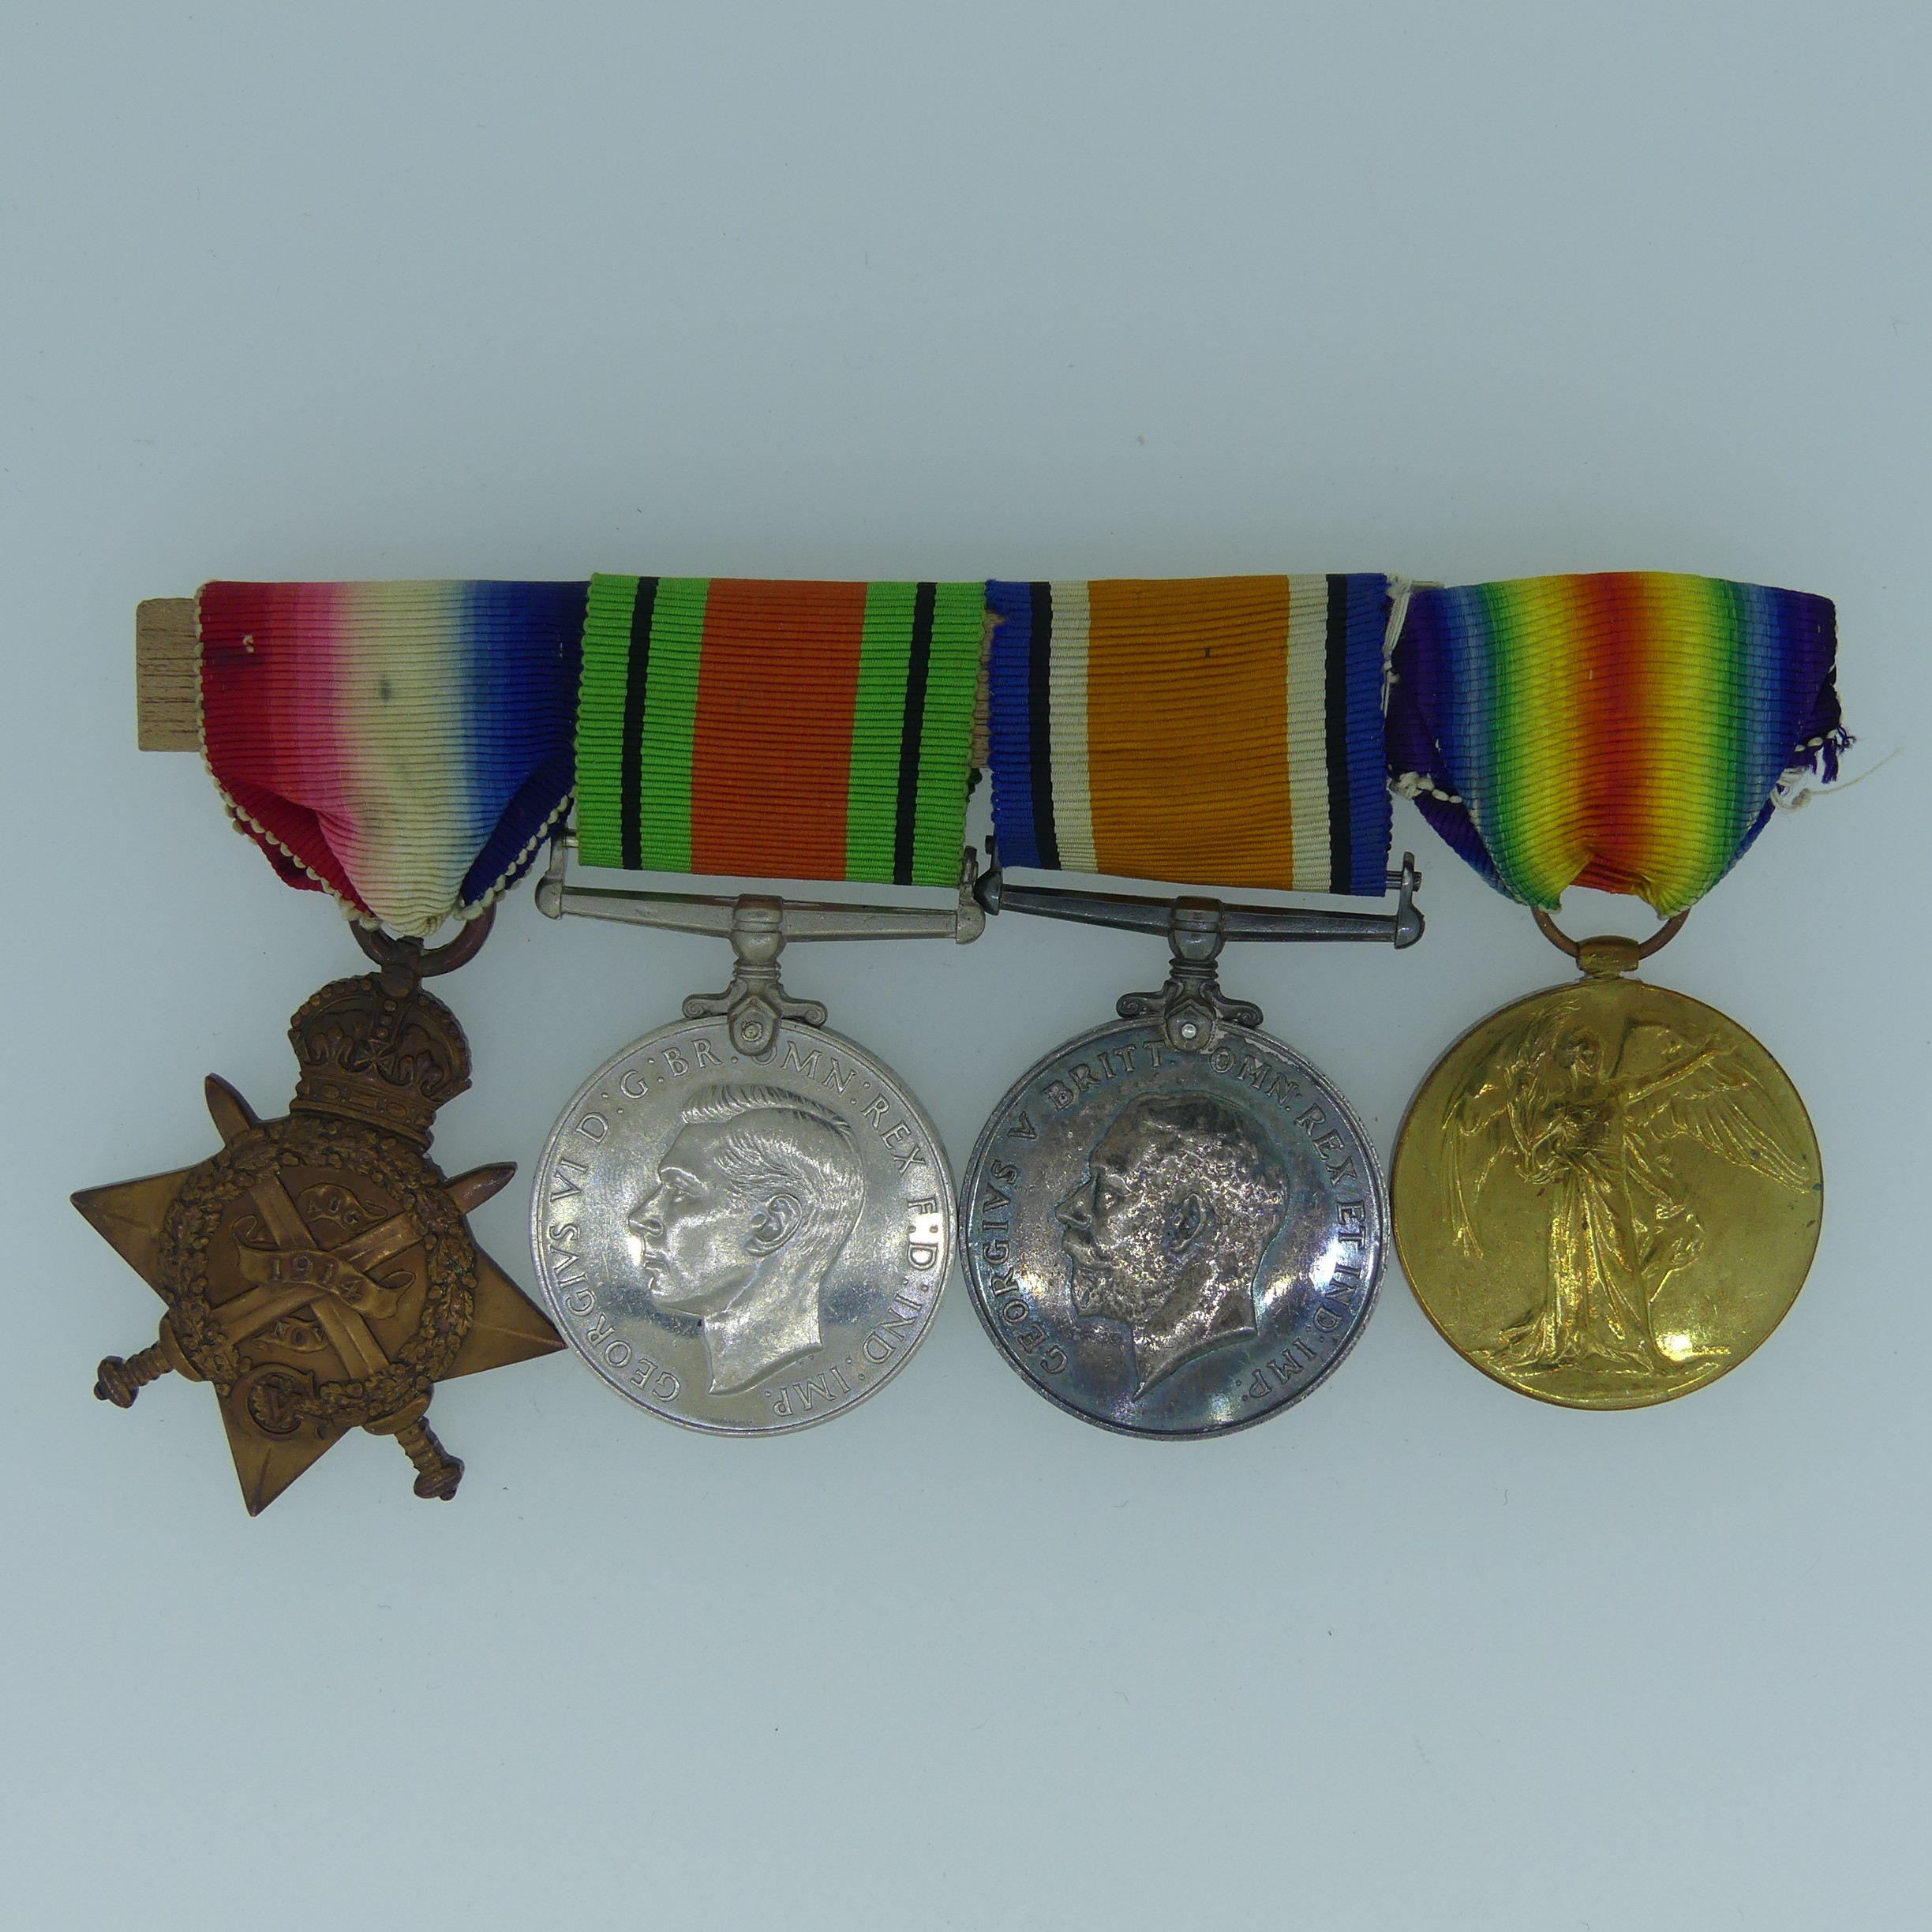 1914 Star Trio and Defence Medal, 63415 Gnr. W. Fairbrass R.H.A (on Star) 63415 Gnr W.H. Fairbrass